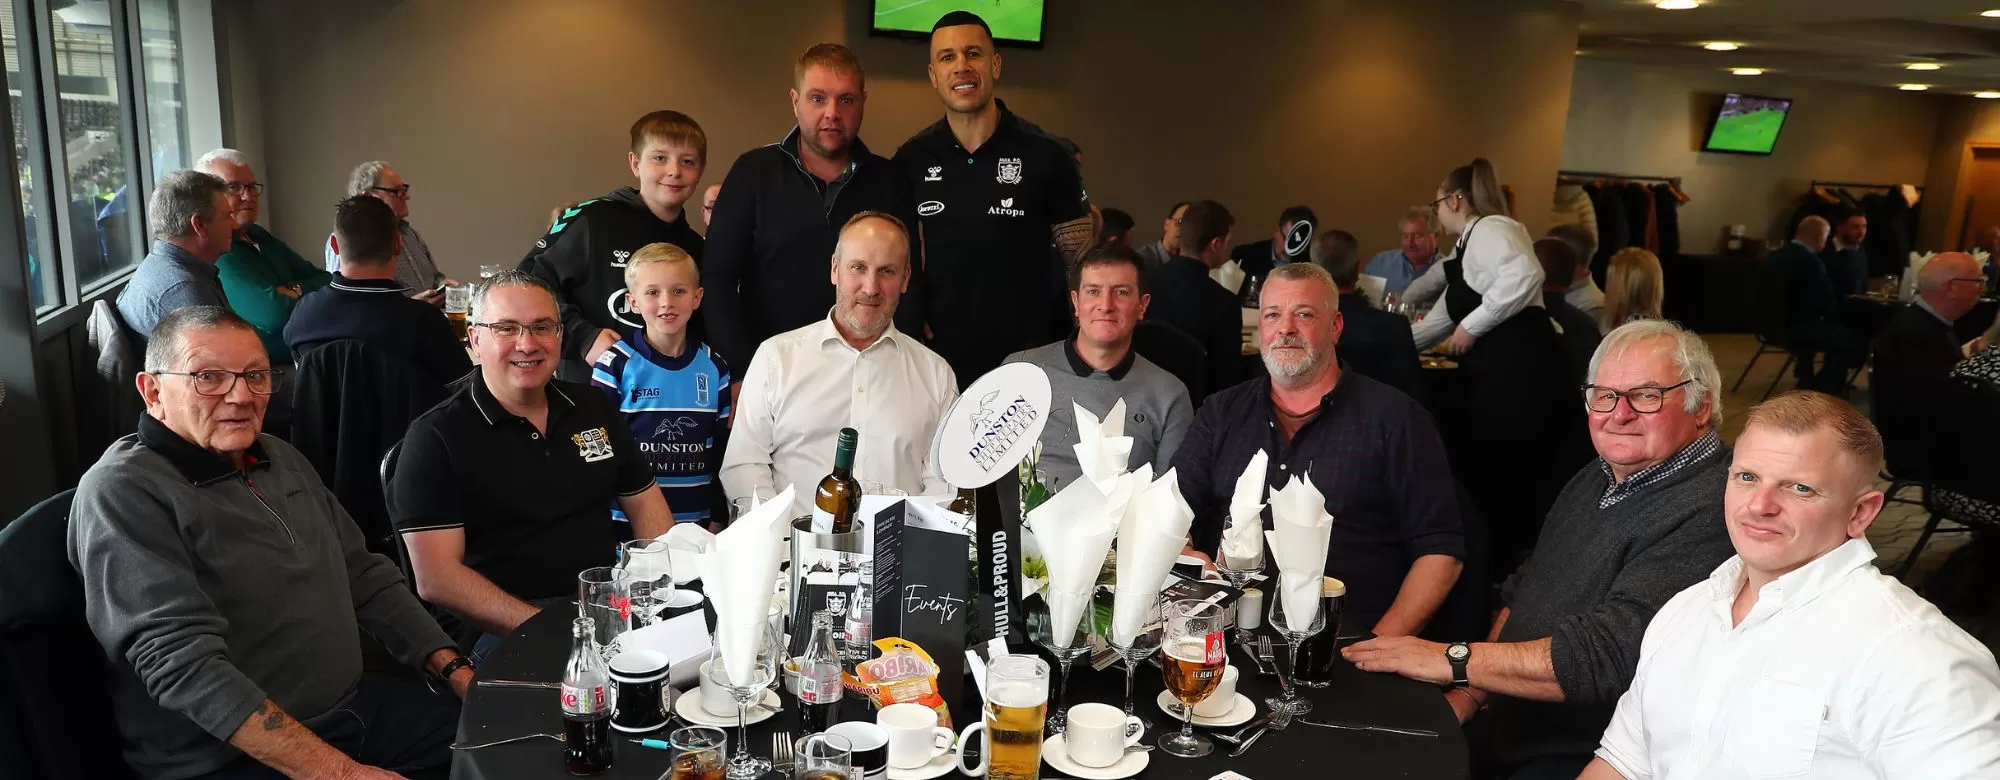 Celebrate Father’s Day With VIP Hospitality At Saints Cup Game